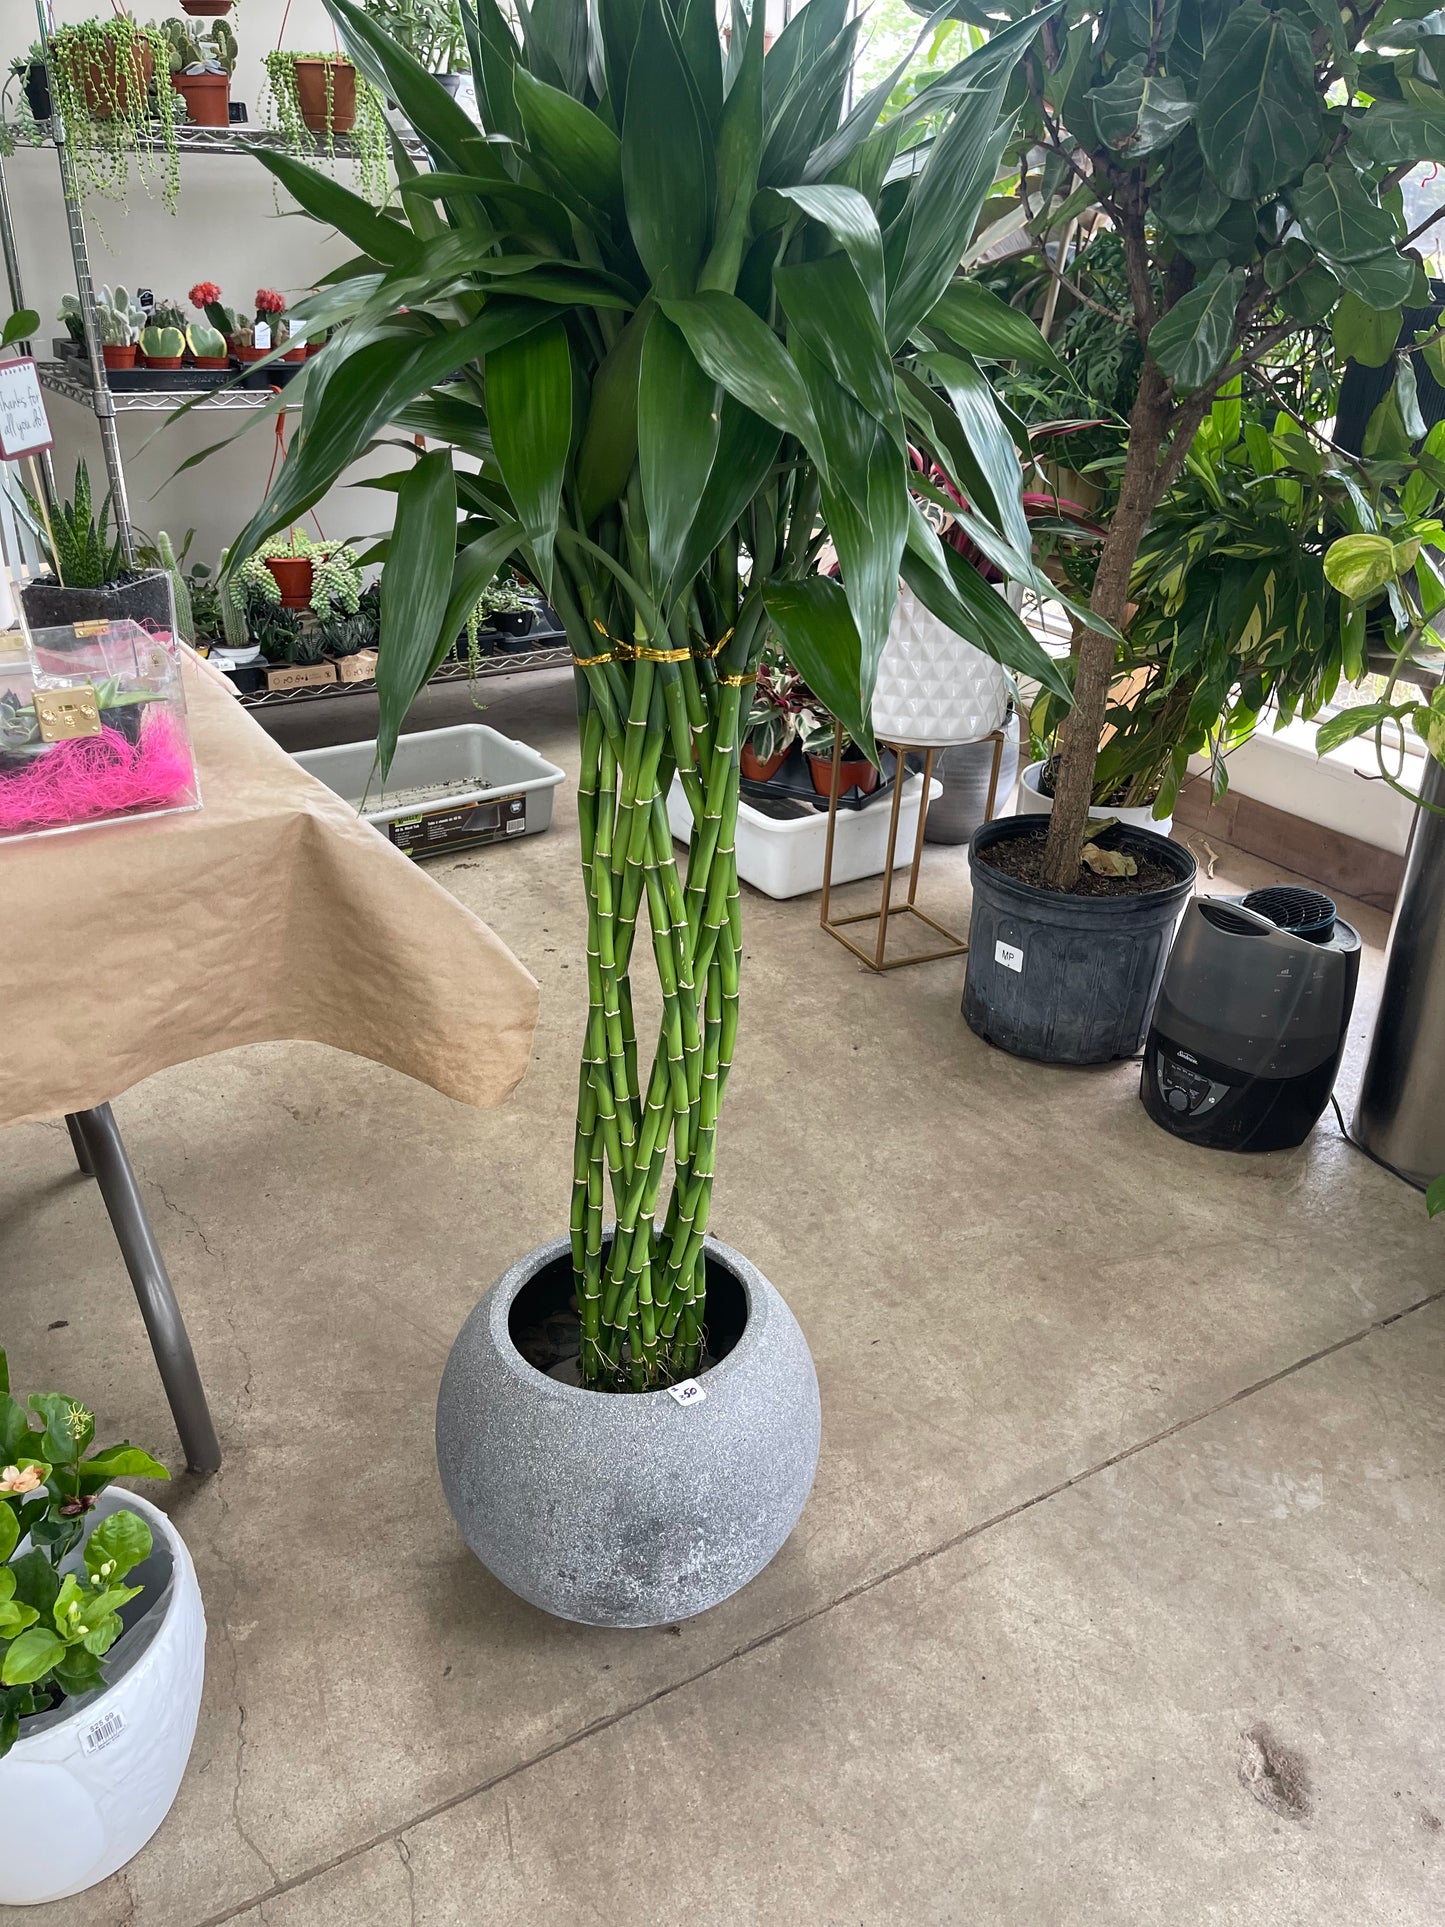 Braided bamboo (3–4feet) pot not included